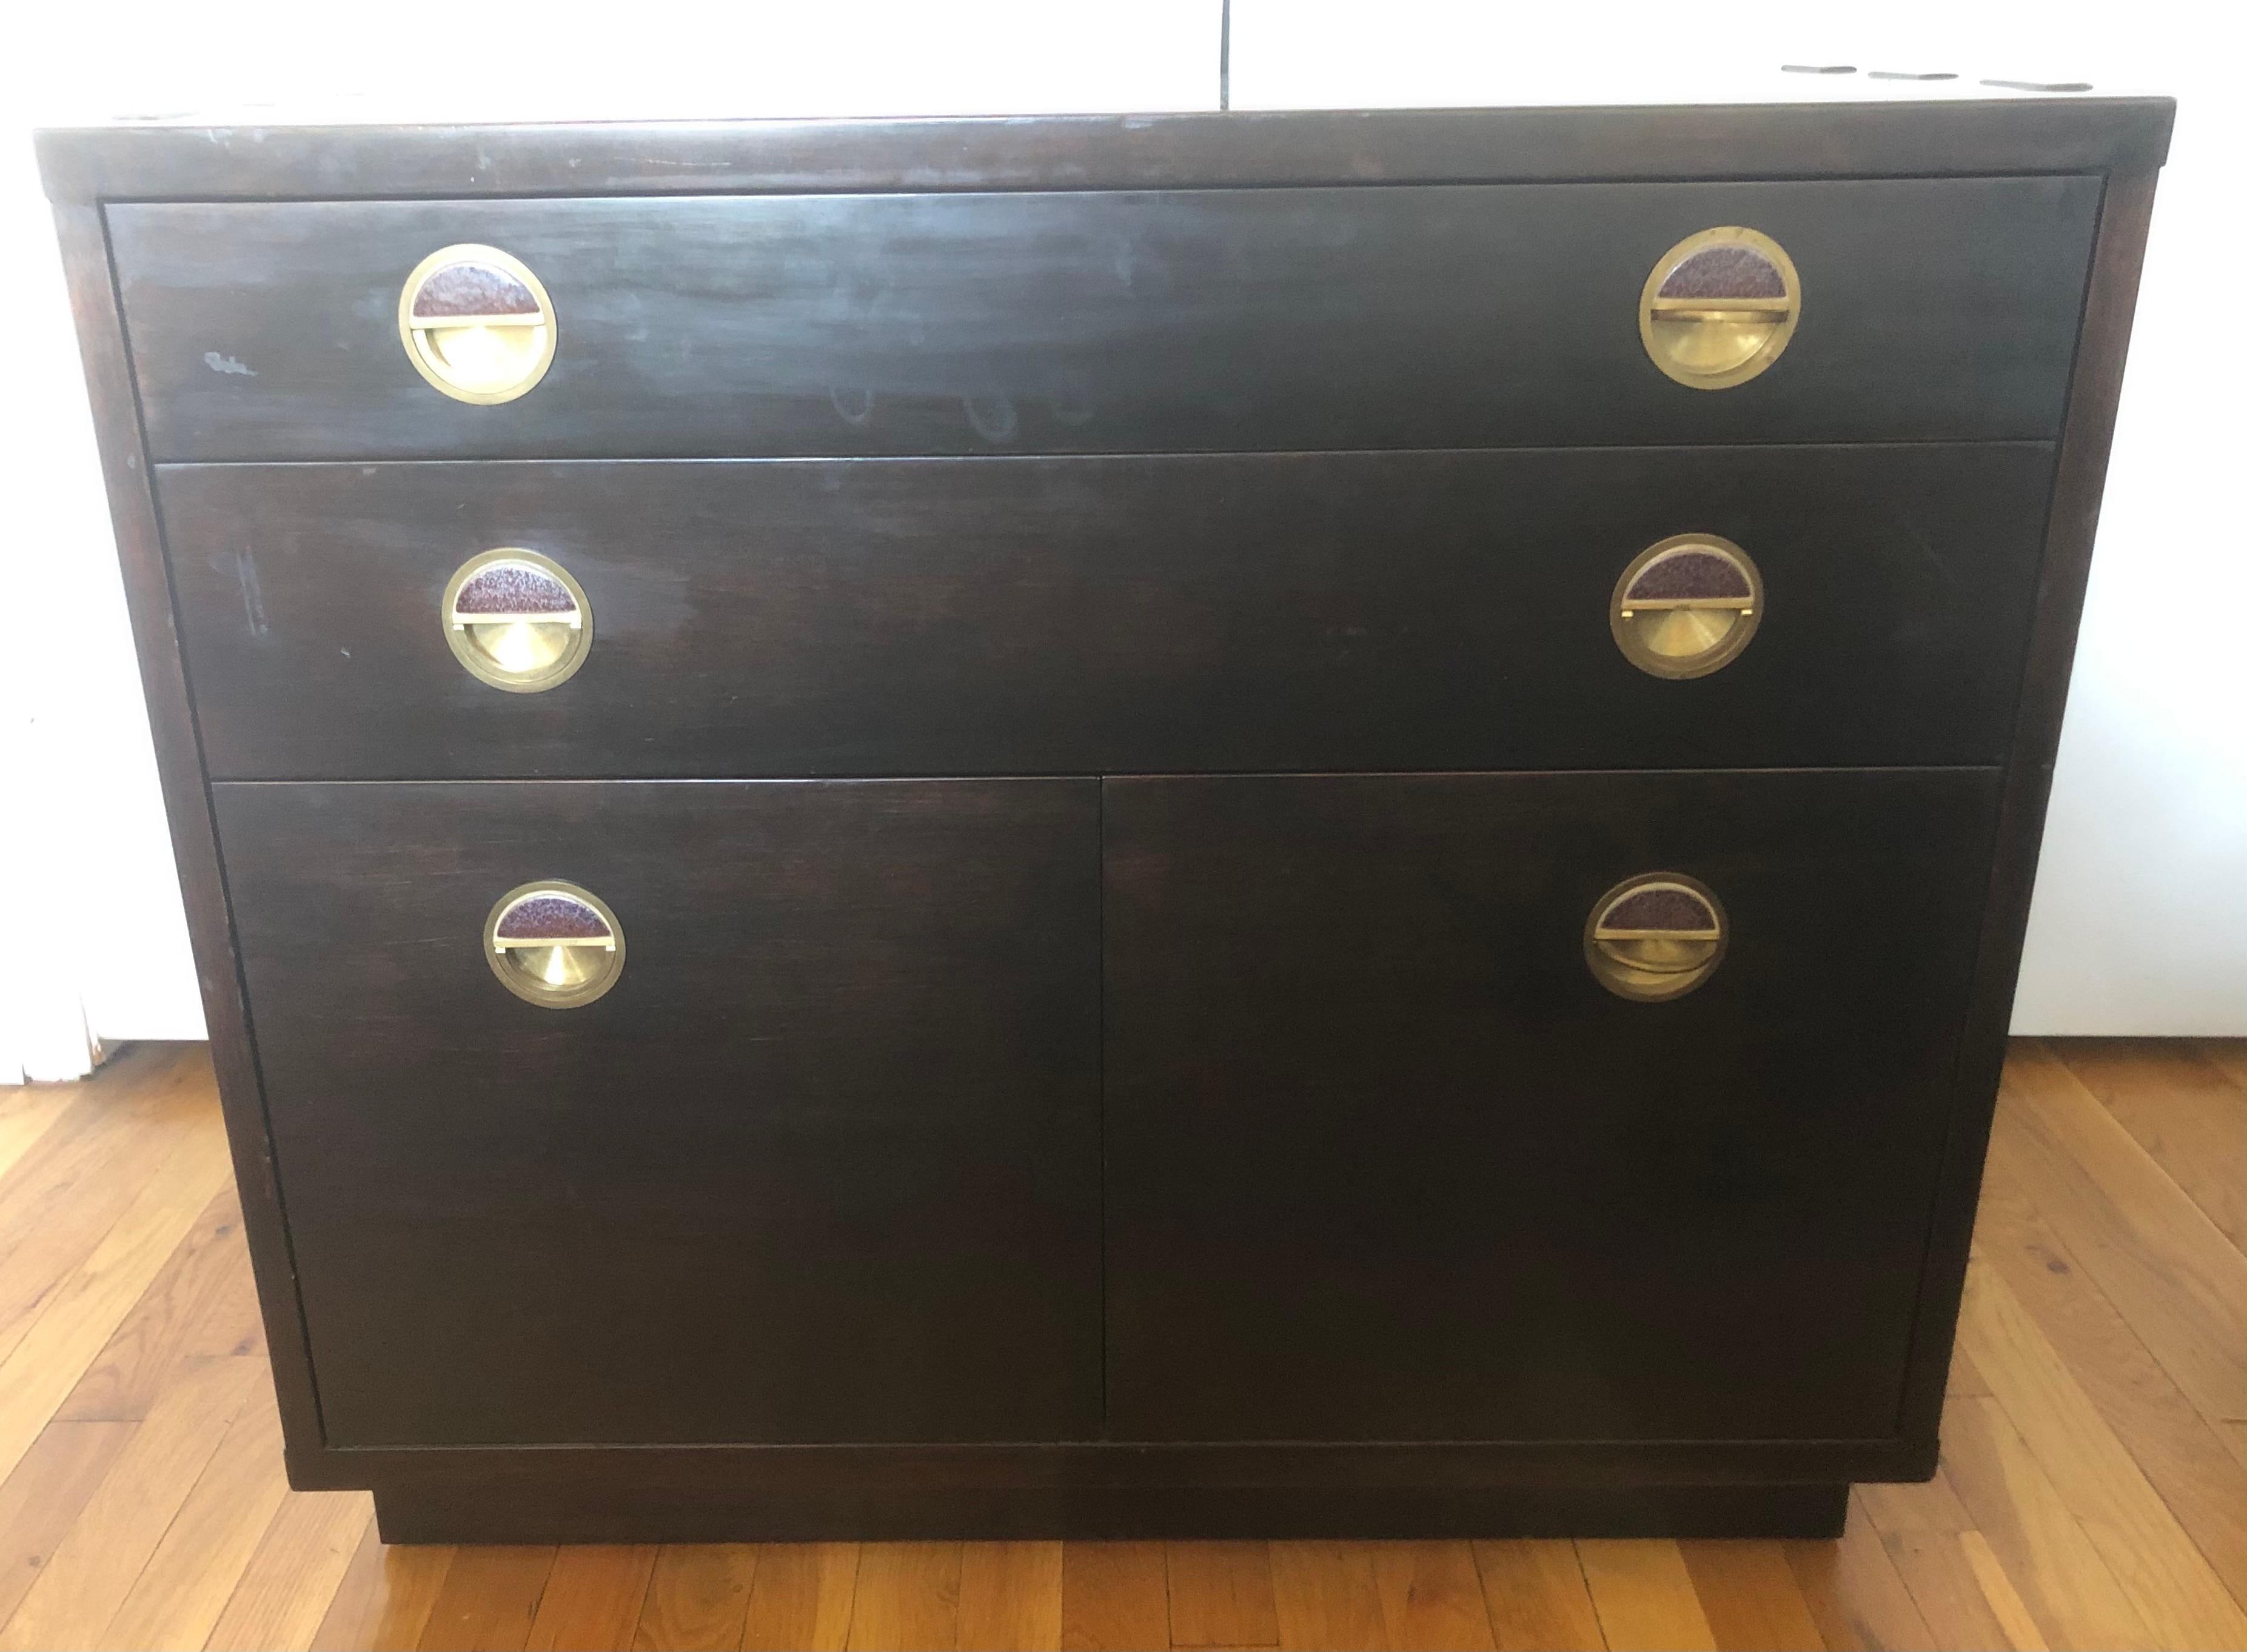 Model 5770 Janus Collection chest of drawers featuring brass pulls with inset purple-blue demi-lune Natzler ceramic tiles, and exaggerated dovetail knuckle joints on tops, sides, and bottom. 

The dark stained mahogany case is set with two shallow